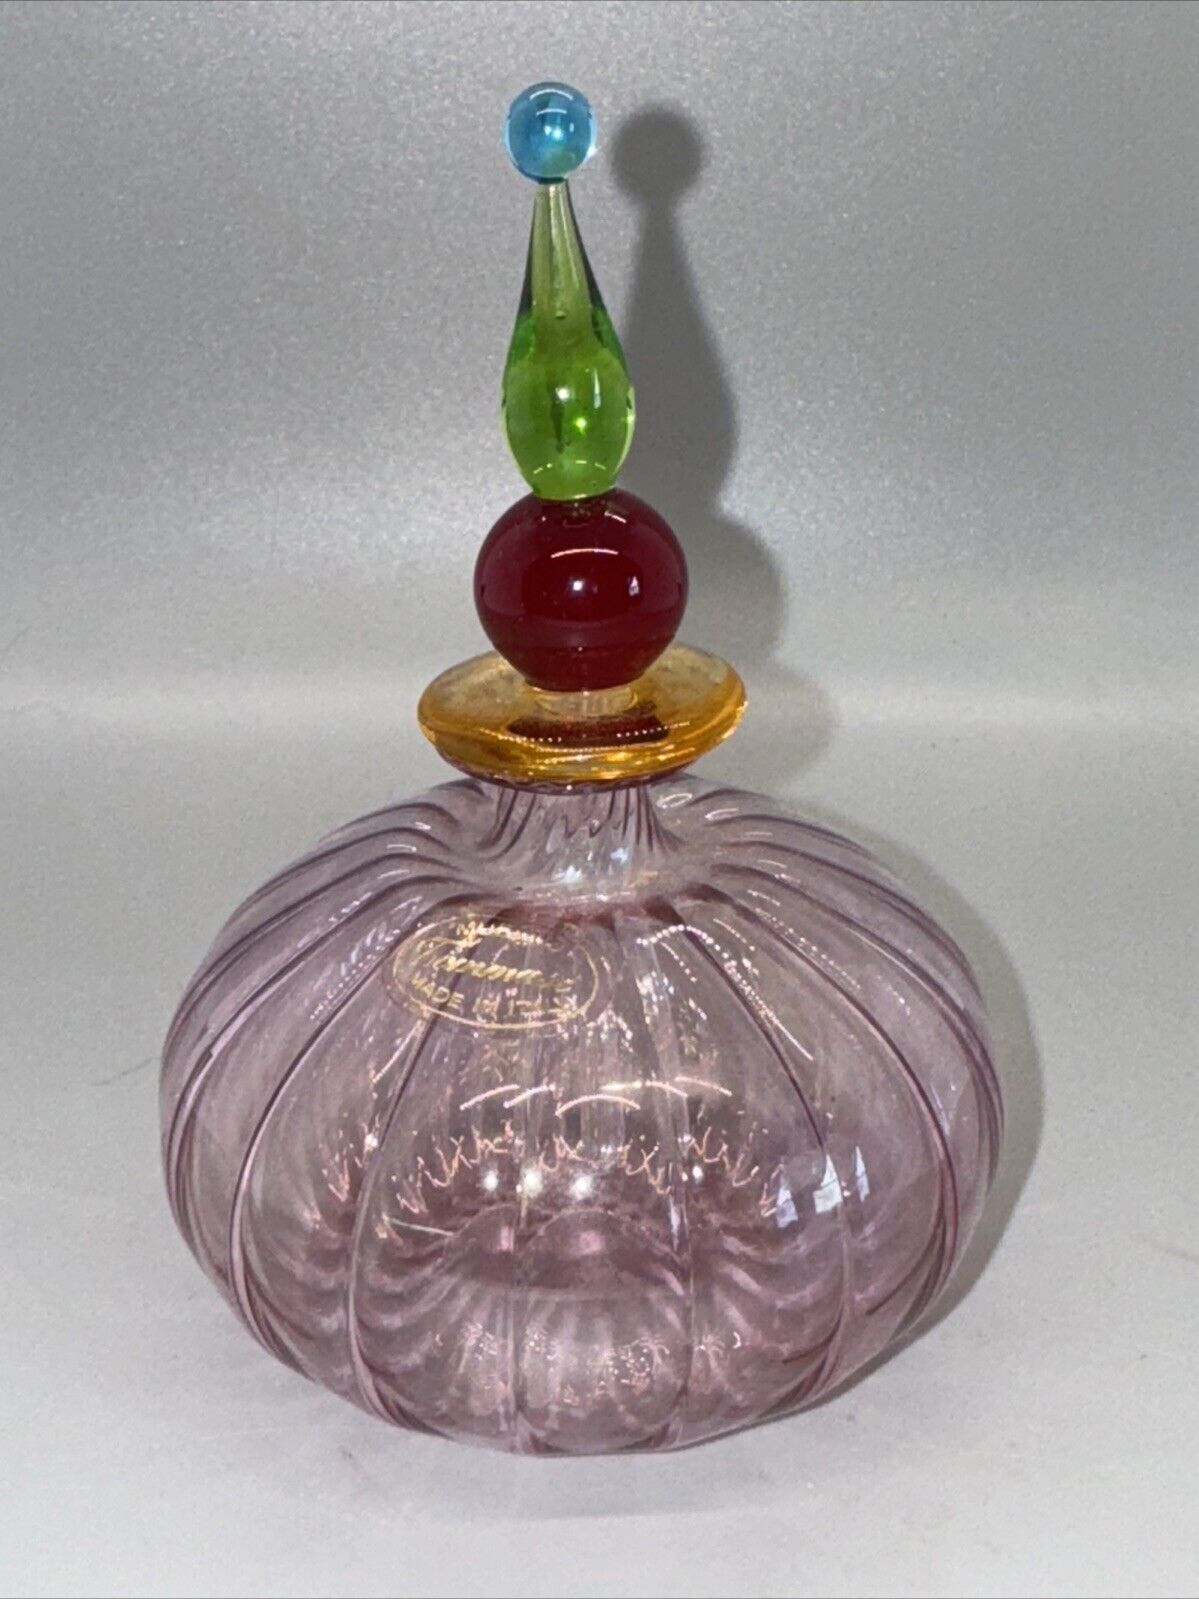 VTG Murano Tommasi Pink Perfume Bottle With Red/Green/Blue Stopper